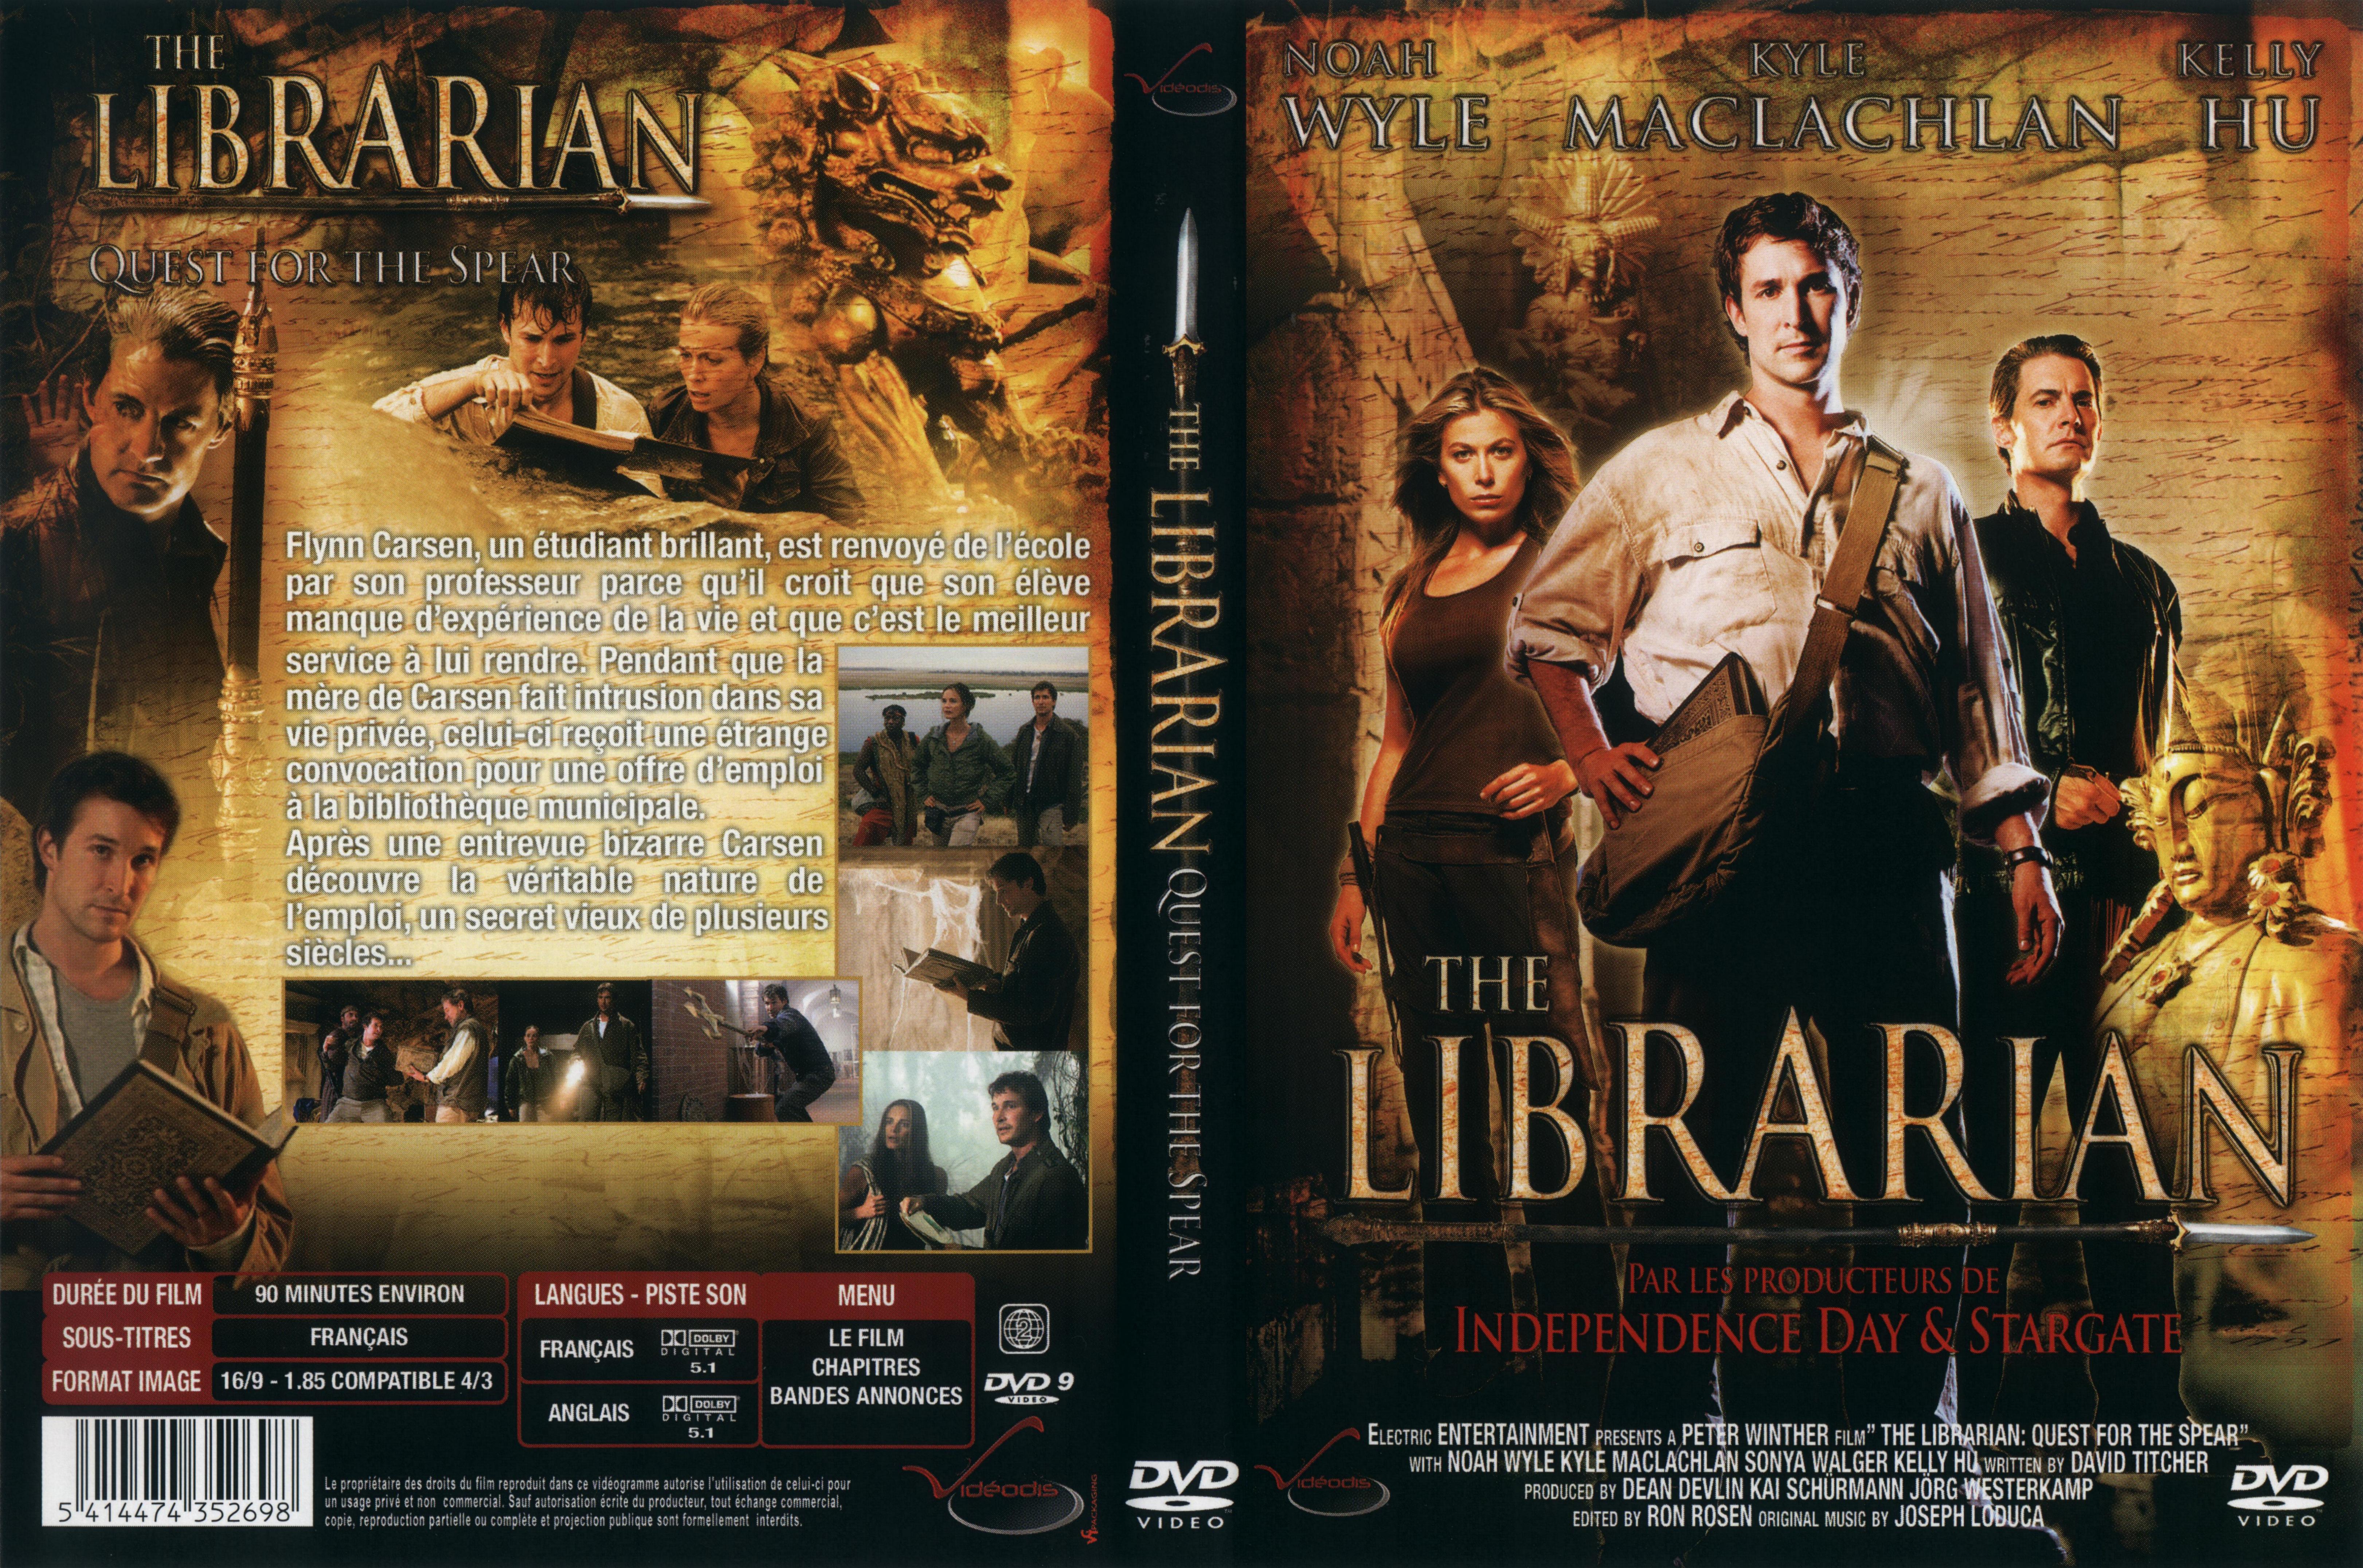 Jaquette DVD The librarian